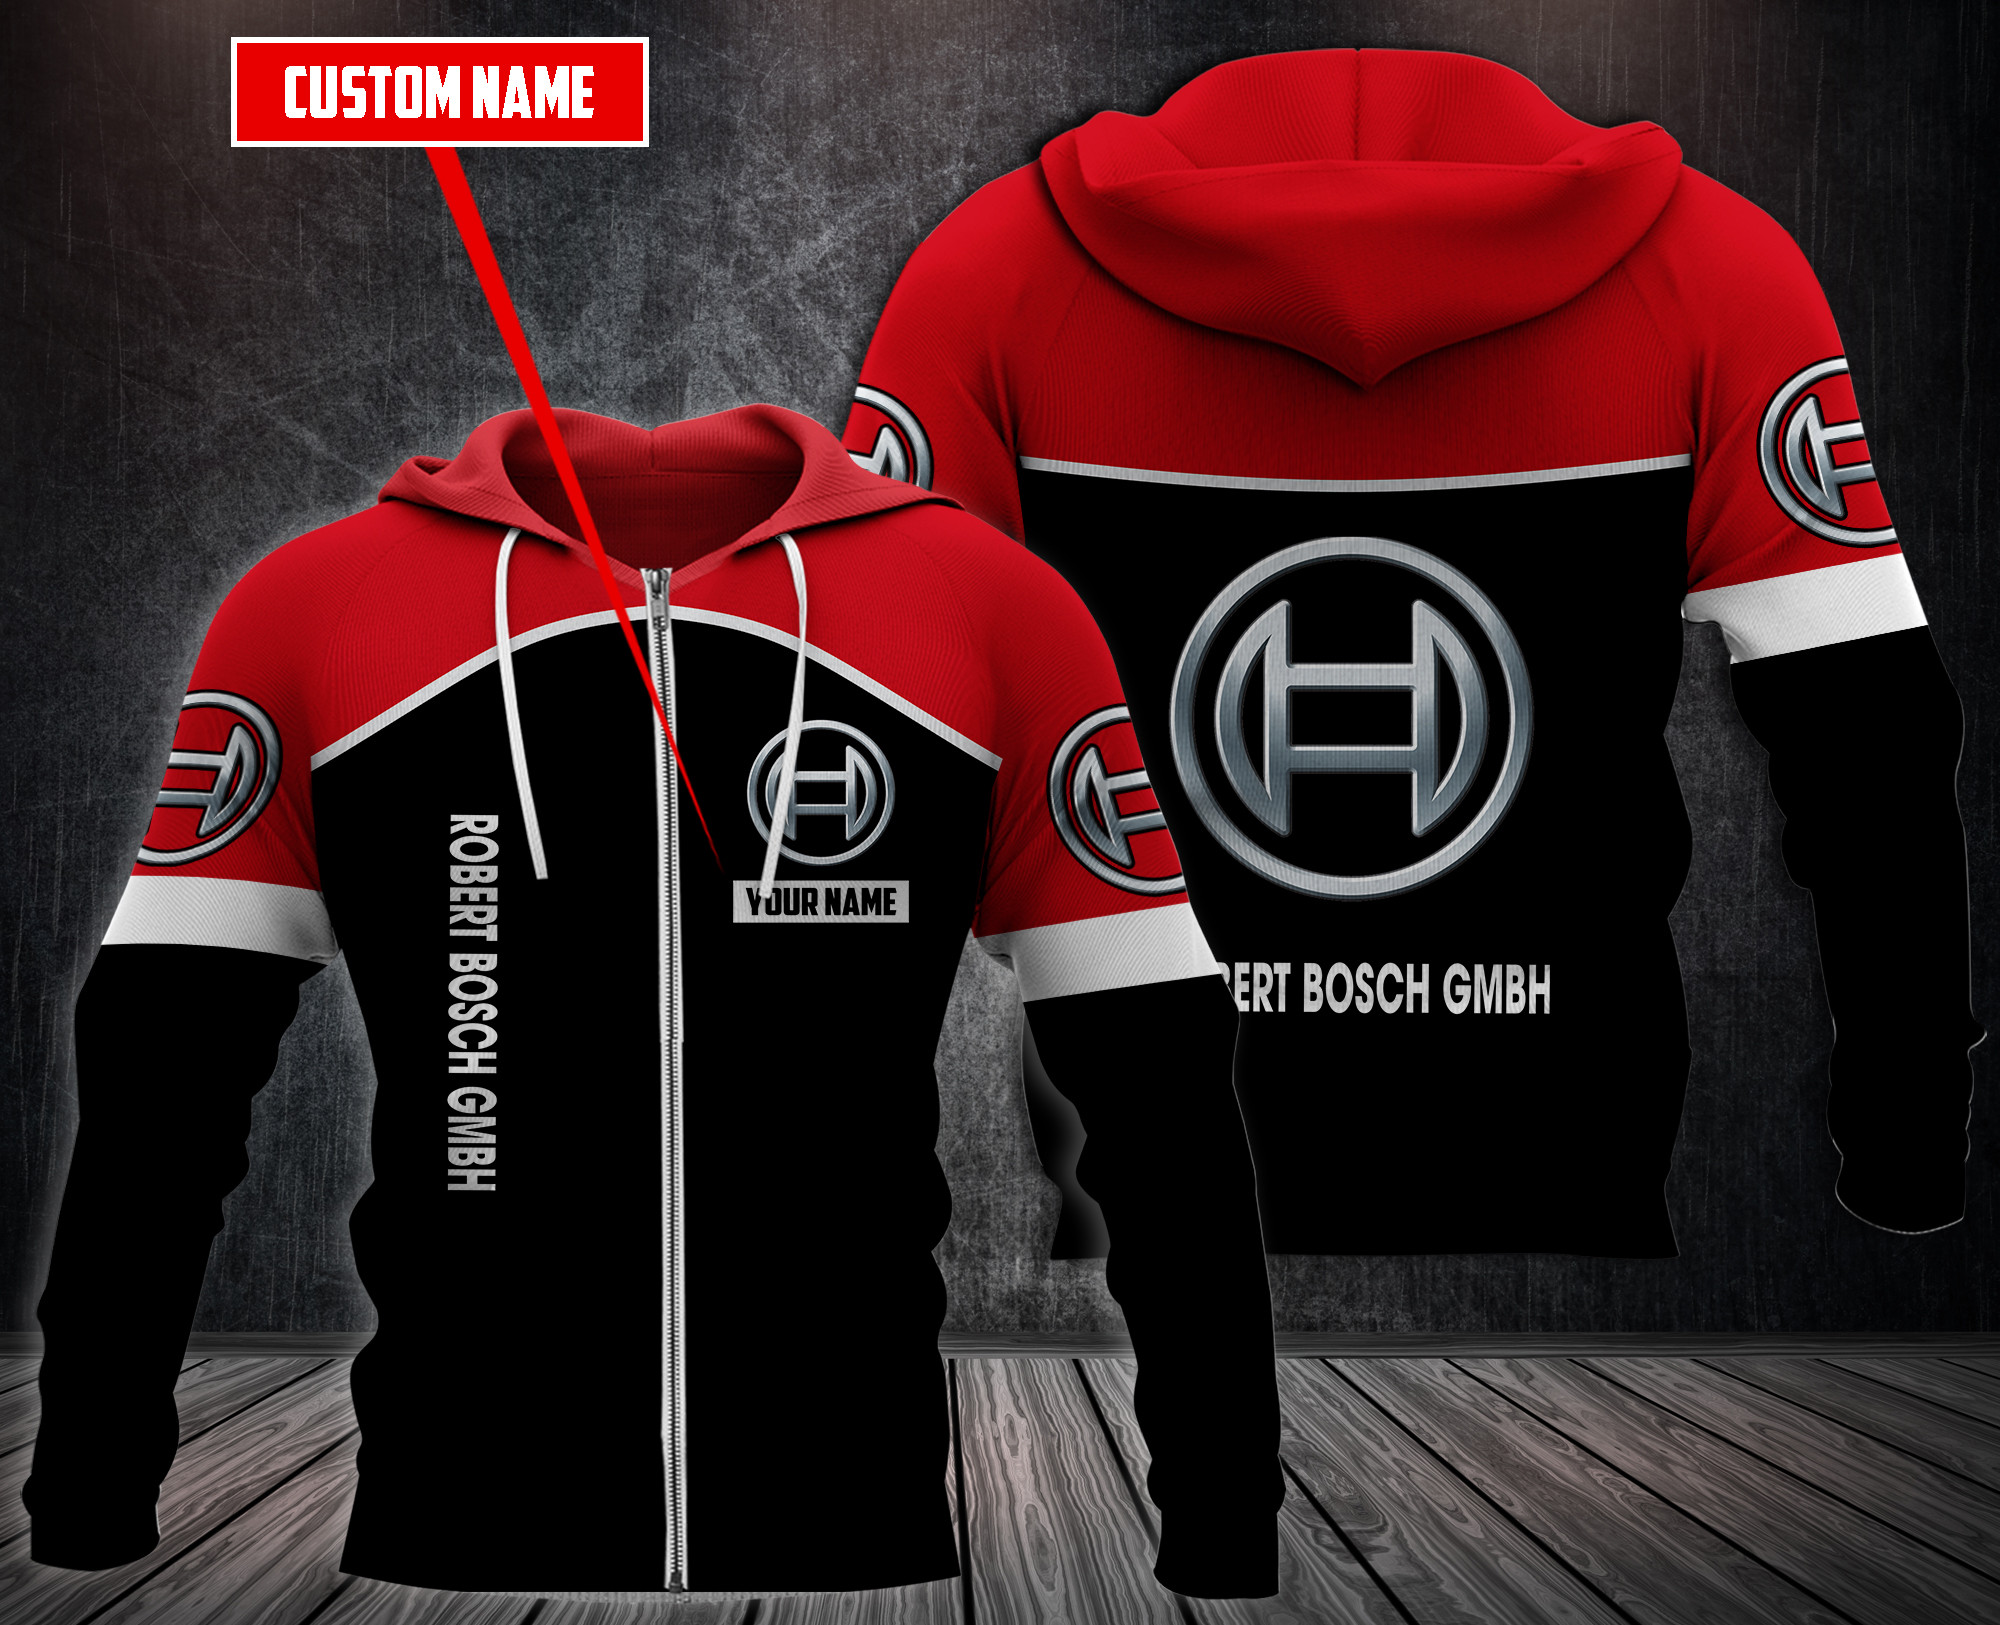 Choose the right hoodies for you on our boxboxshirt and ethershirt websites in 2022 127